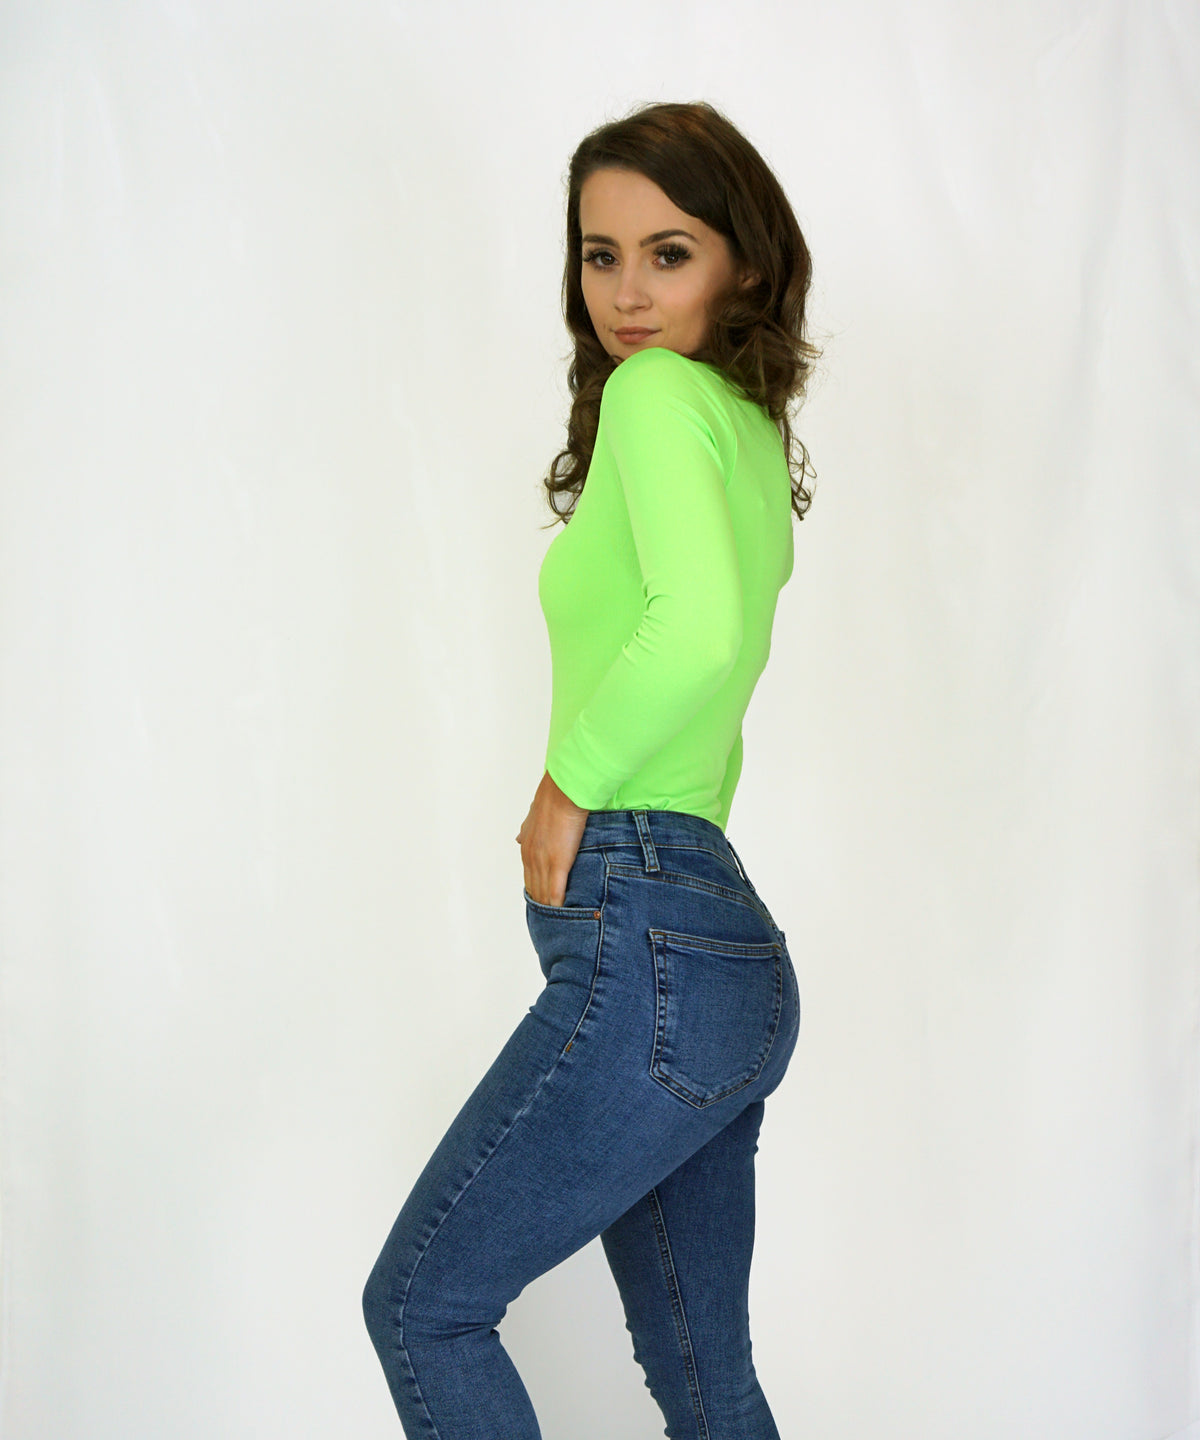 Styled Clothing Neon green bodysuit back view